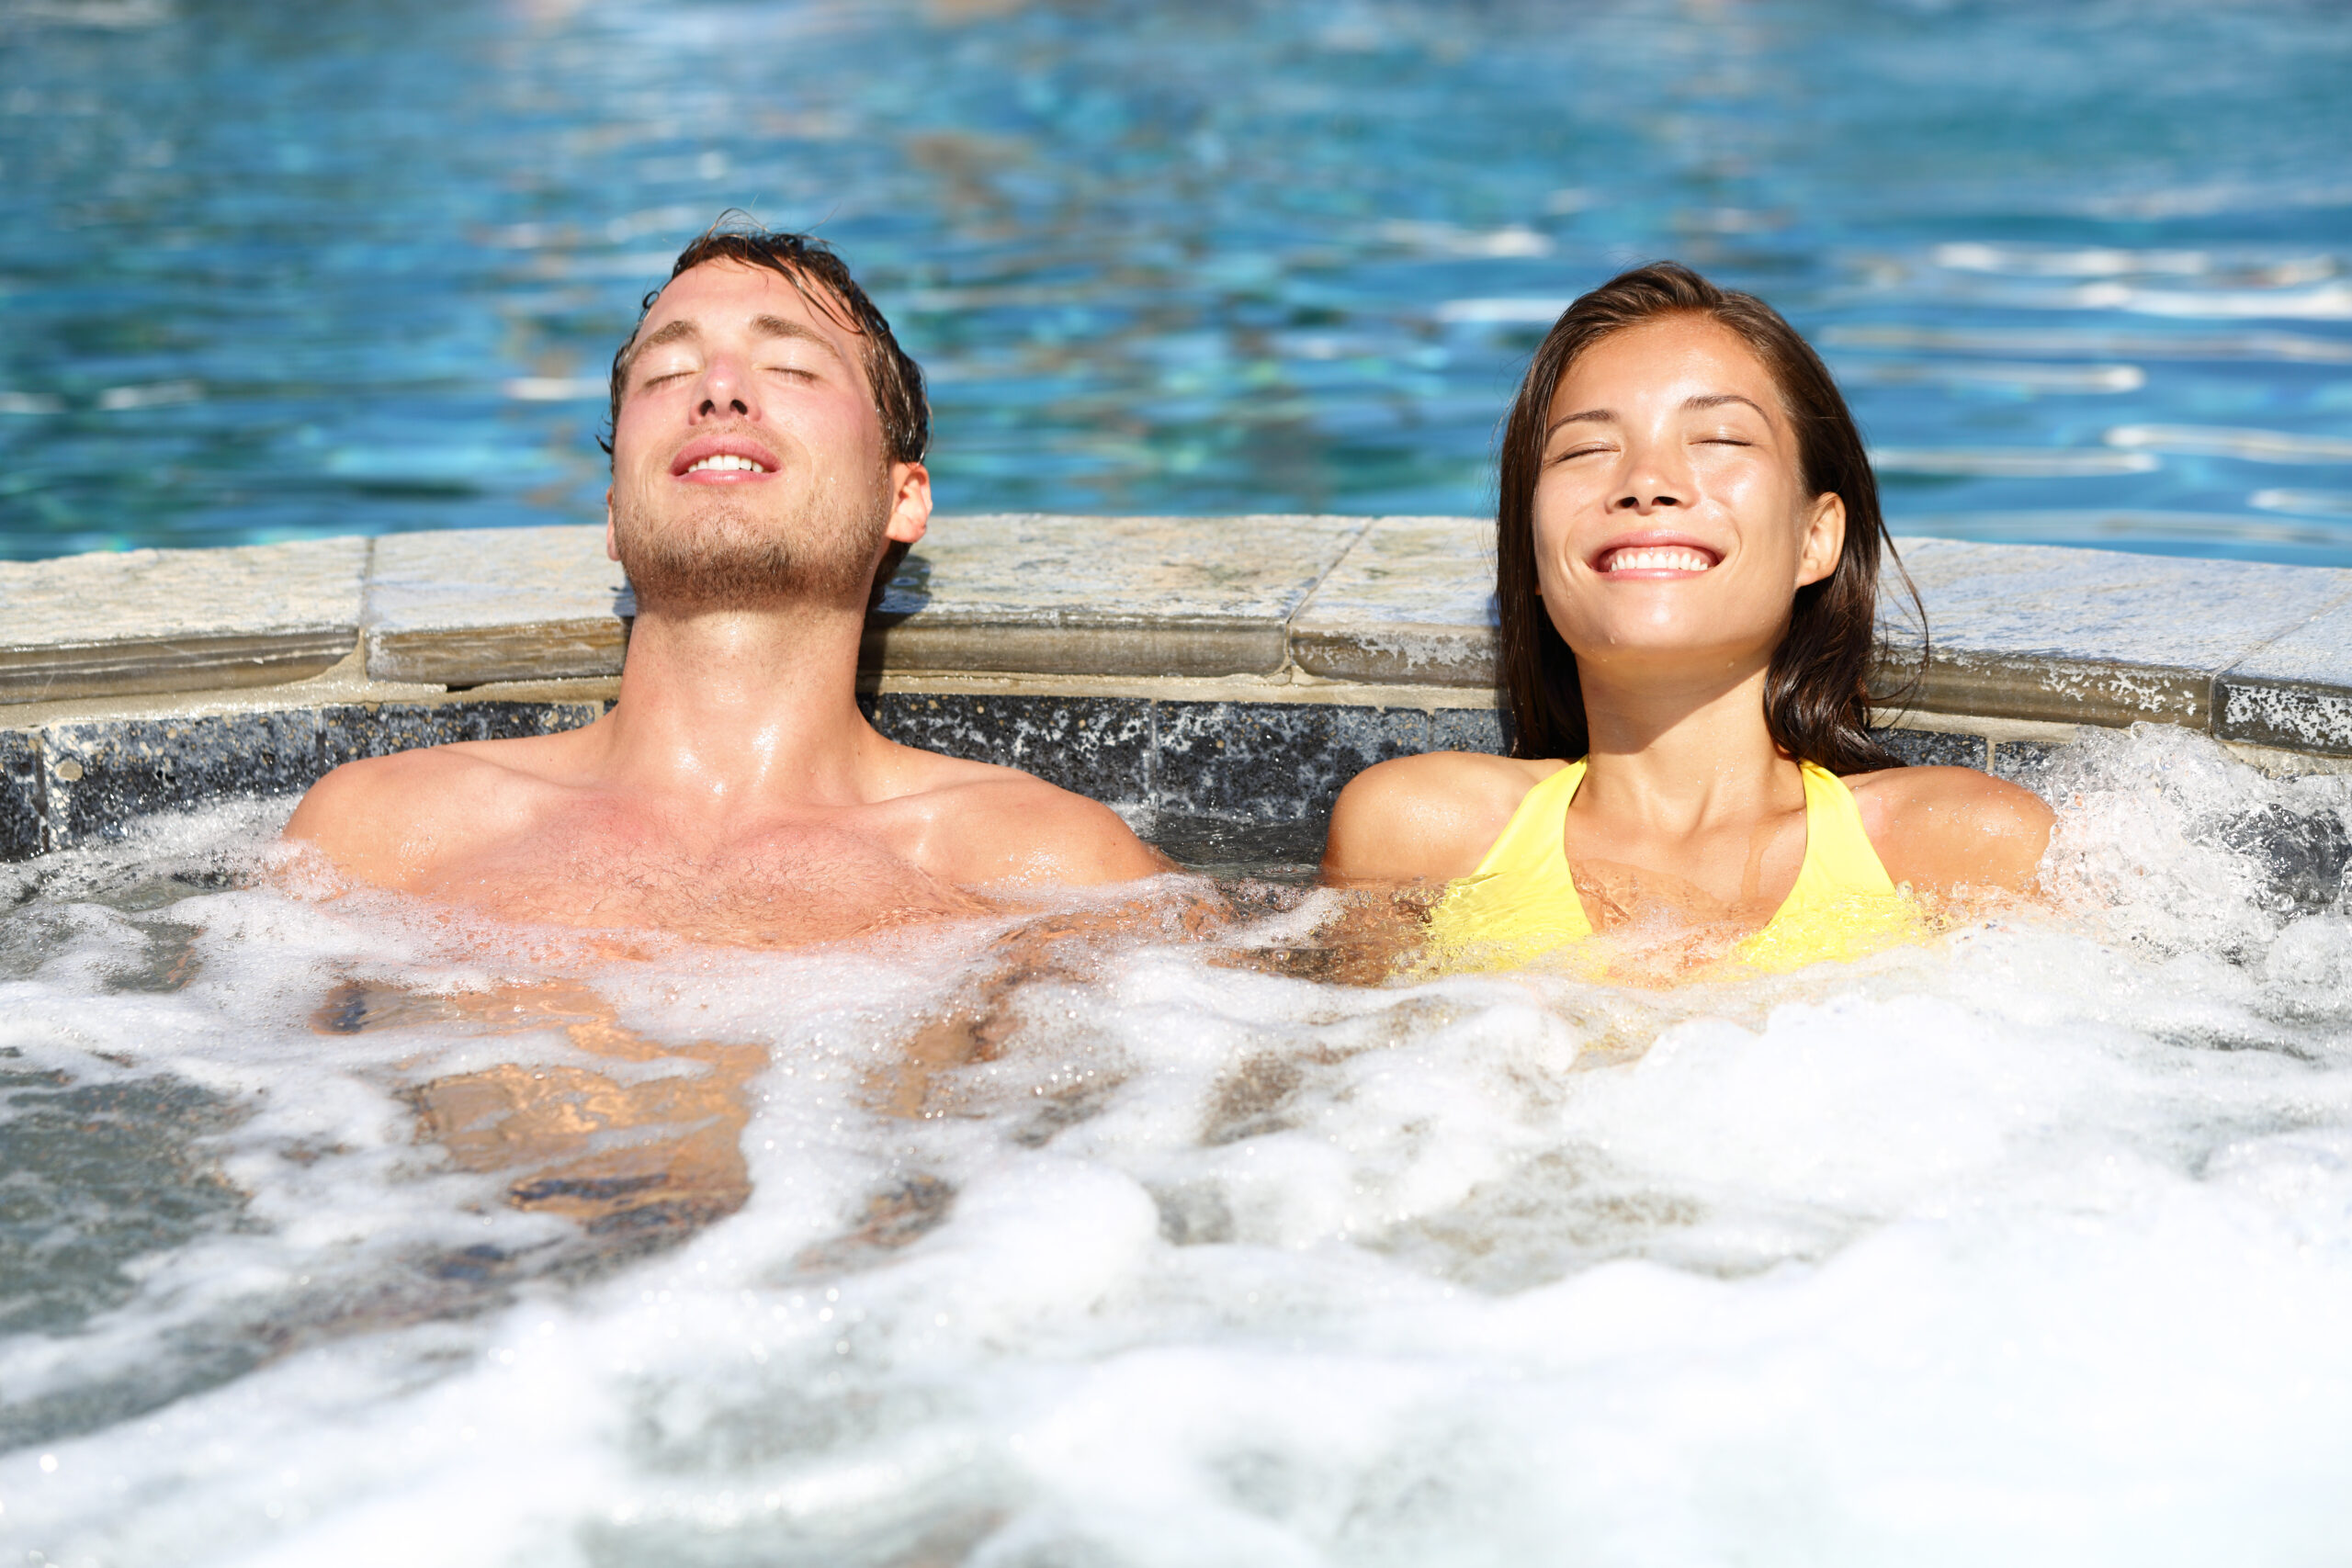 A man and a woman relaxing in hot tubs by the pool, enjoying a serene and luxurious poolside design for relaxation and leisure.